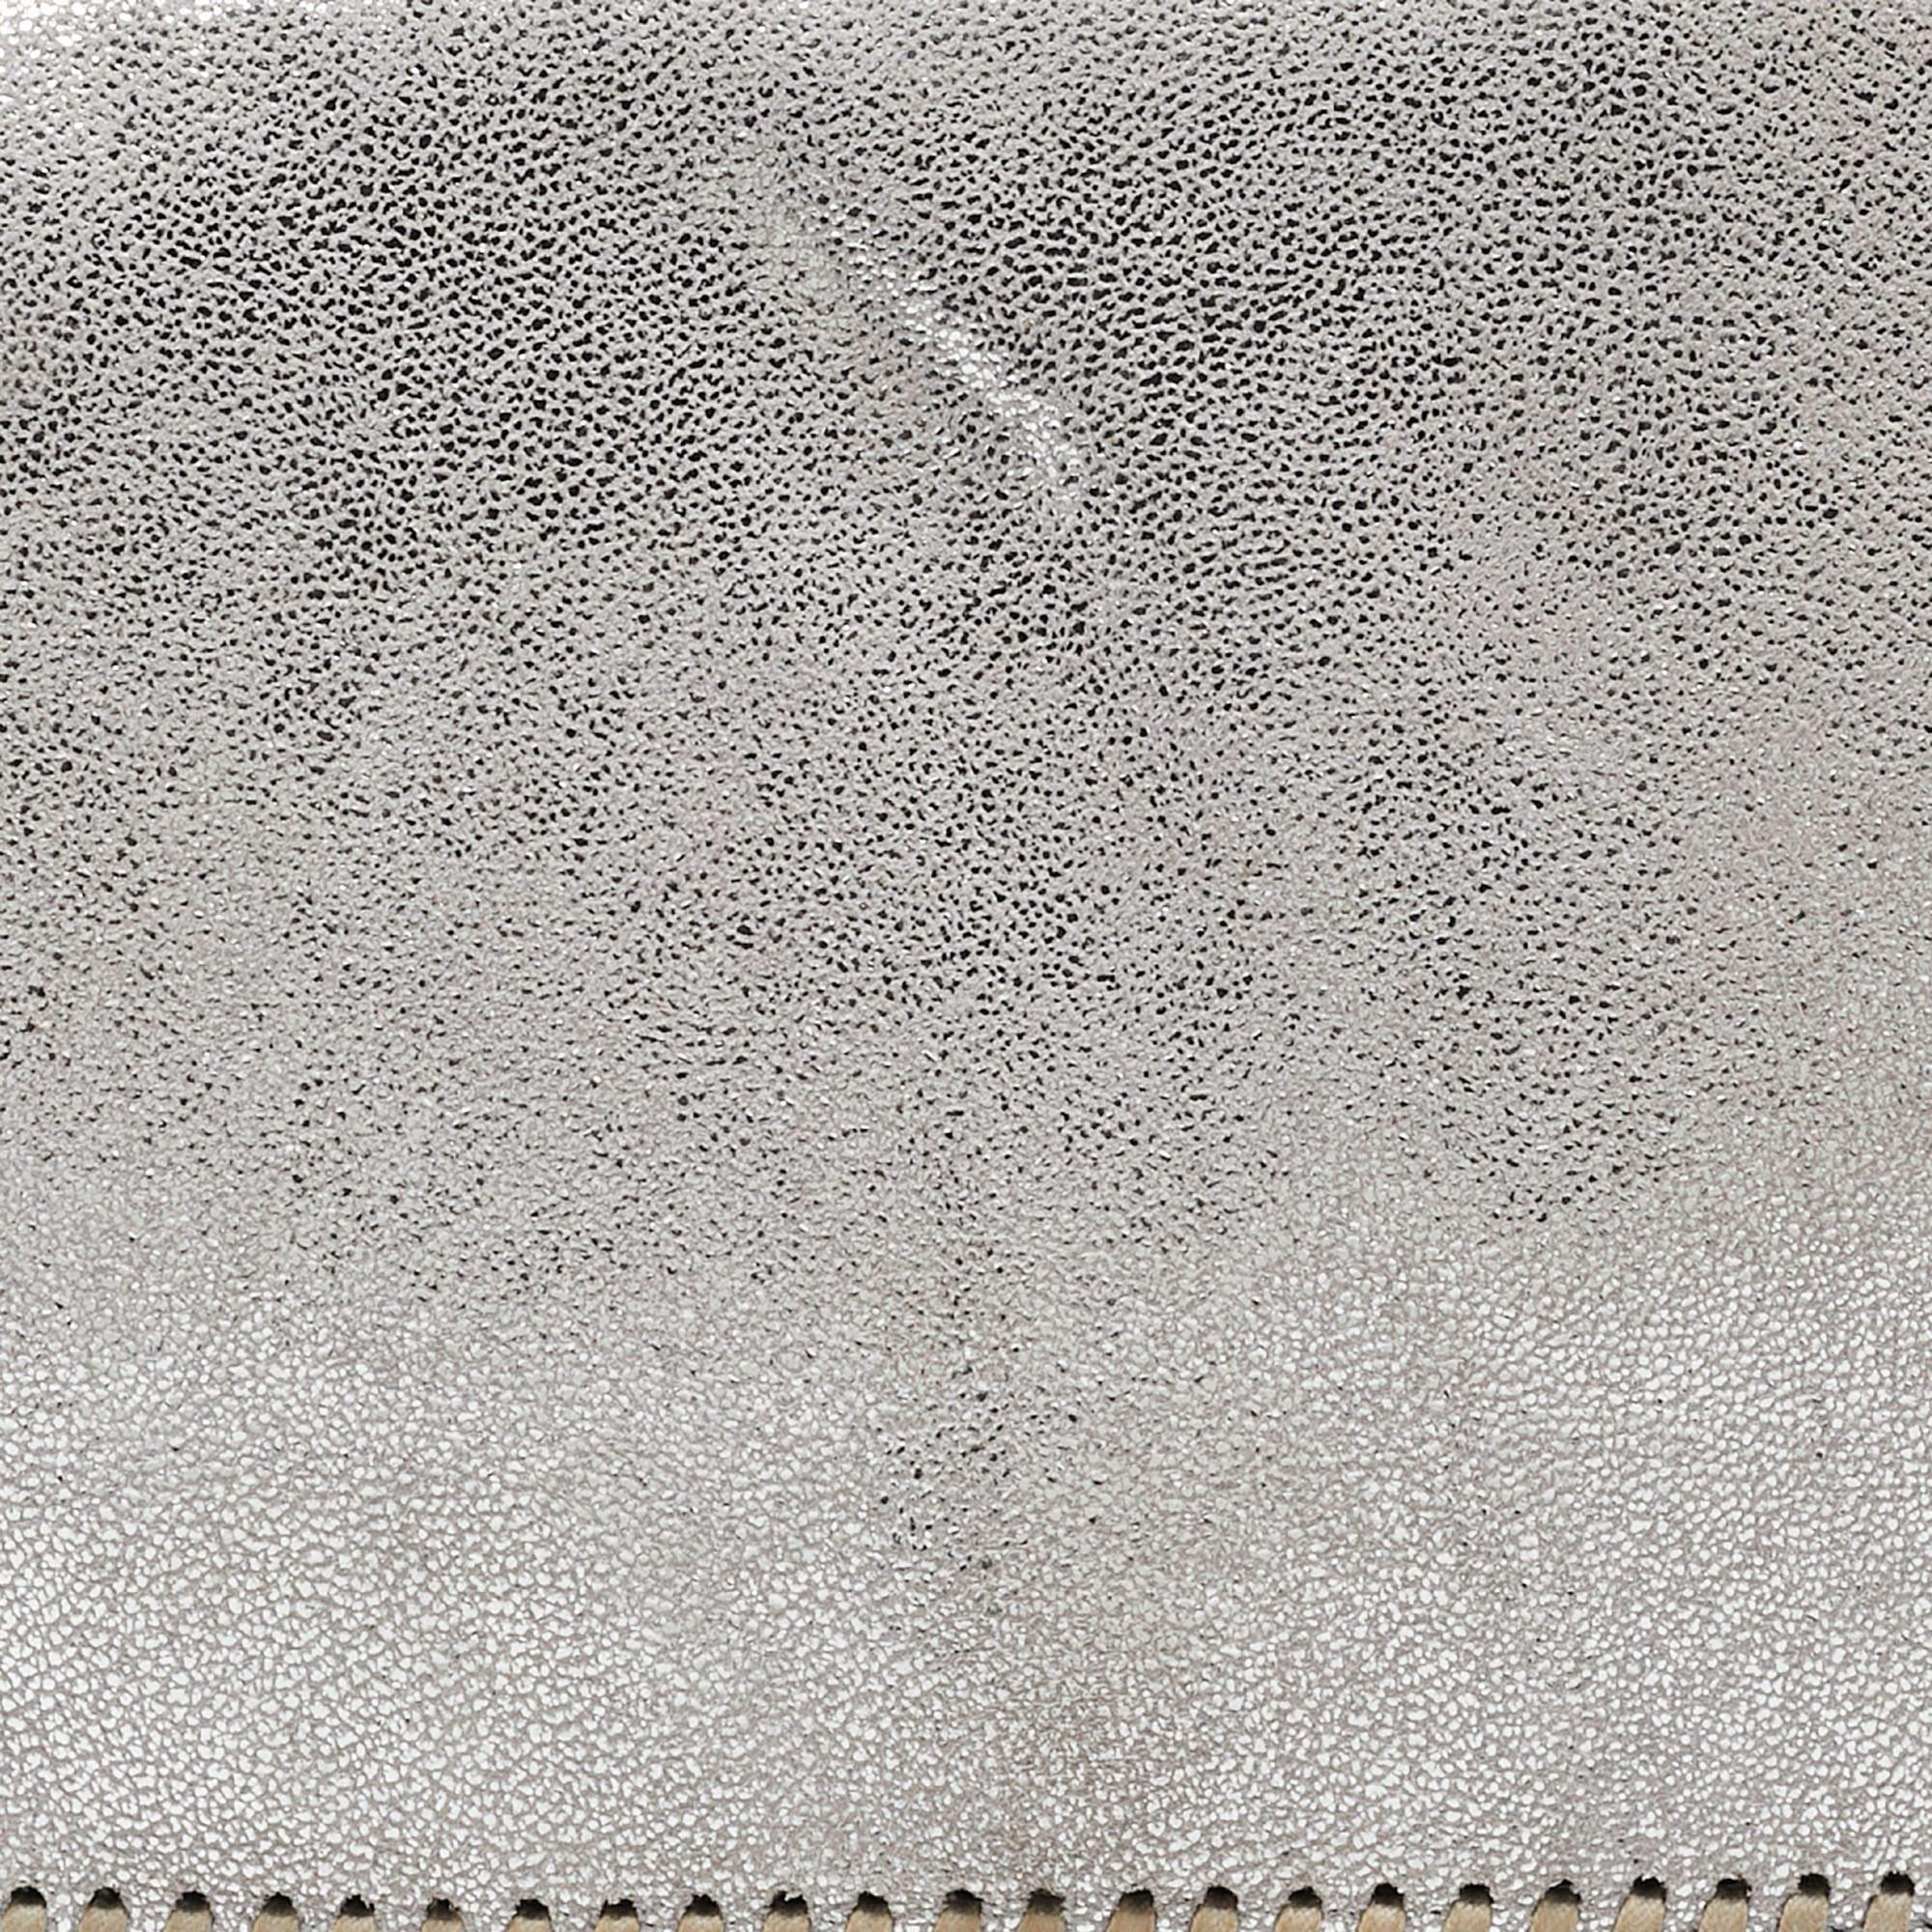 Stella McCartney Silver Faux Leather Falabella Fold-Over Clutch For Sale 13